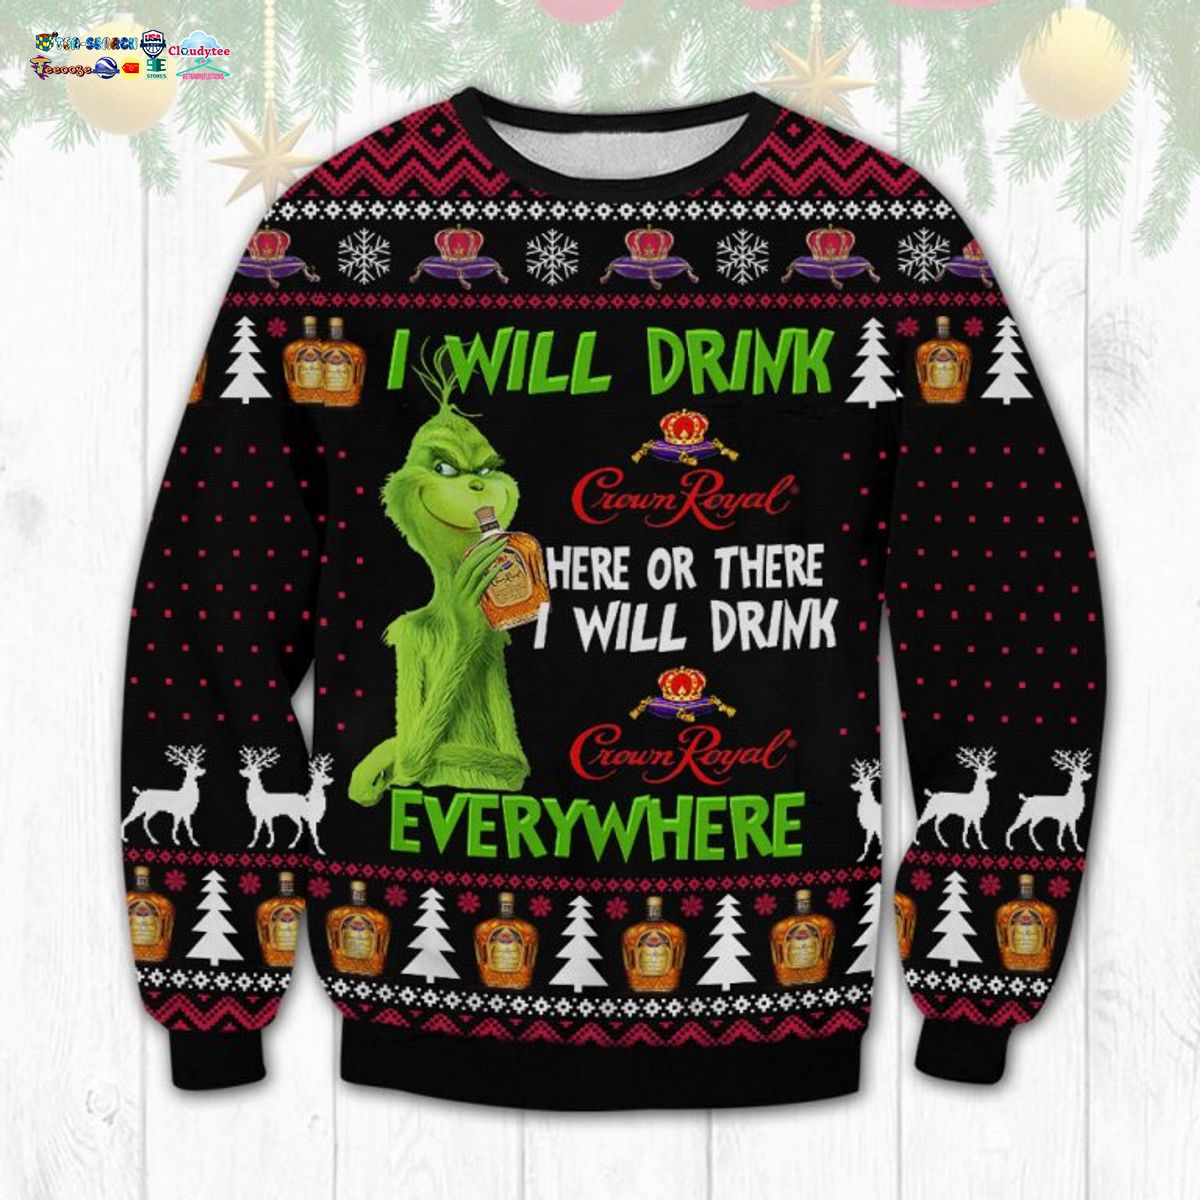 grinch-i-will-drink-crown-royal-everywhere-ugly-christmas-sweater-1-7LCEF.jpg